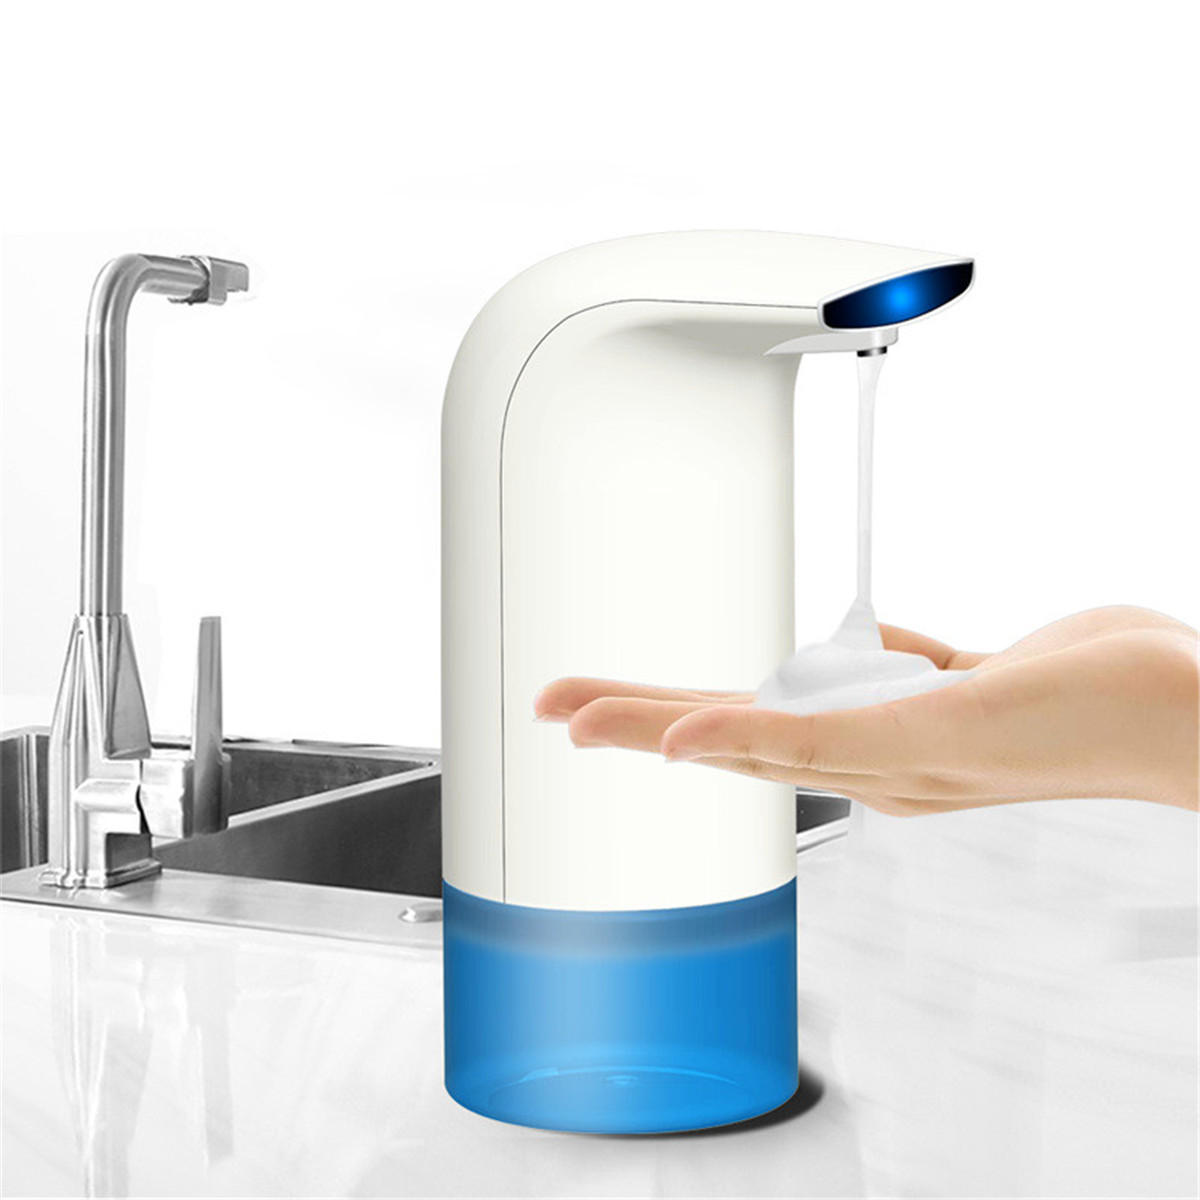 

350ml Automatic Induction Foaming Hand Washer Infrared Smart Sensor Soap Dispenser Liquid Soap Dispensers for Kitchen Ba